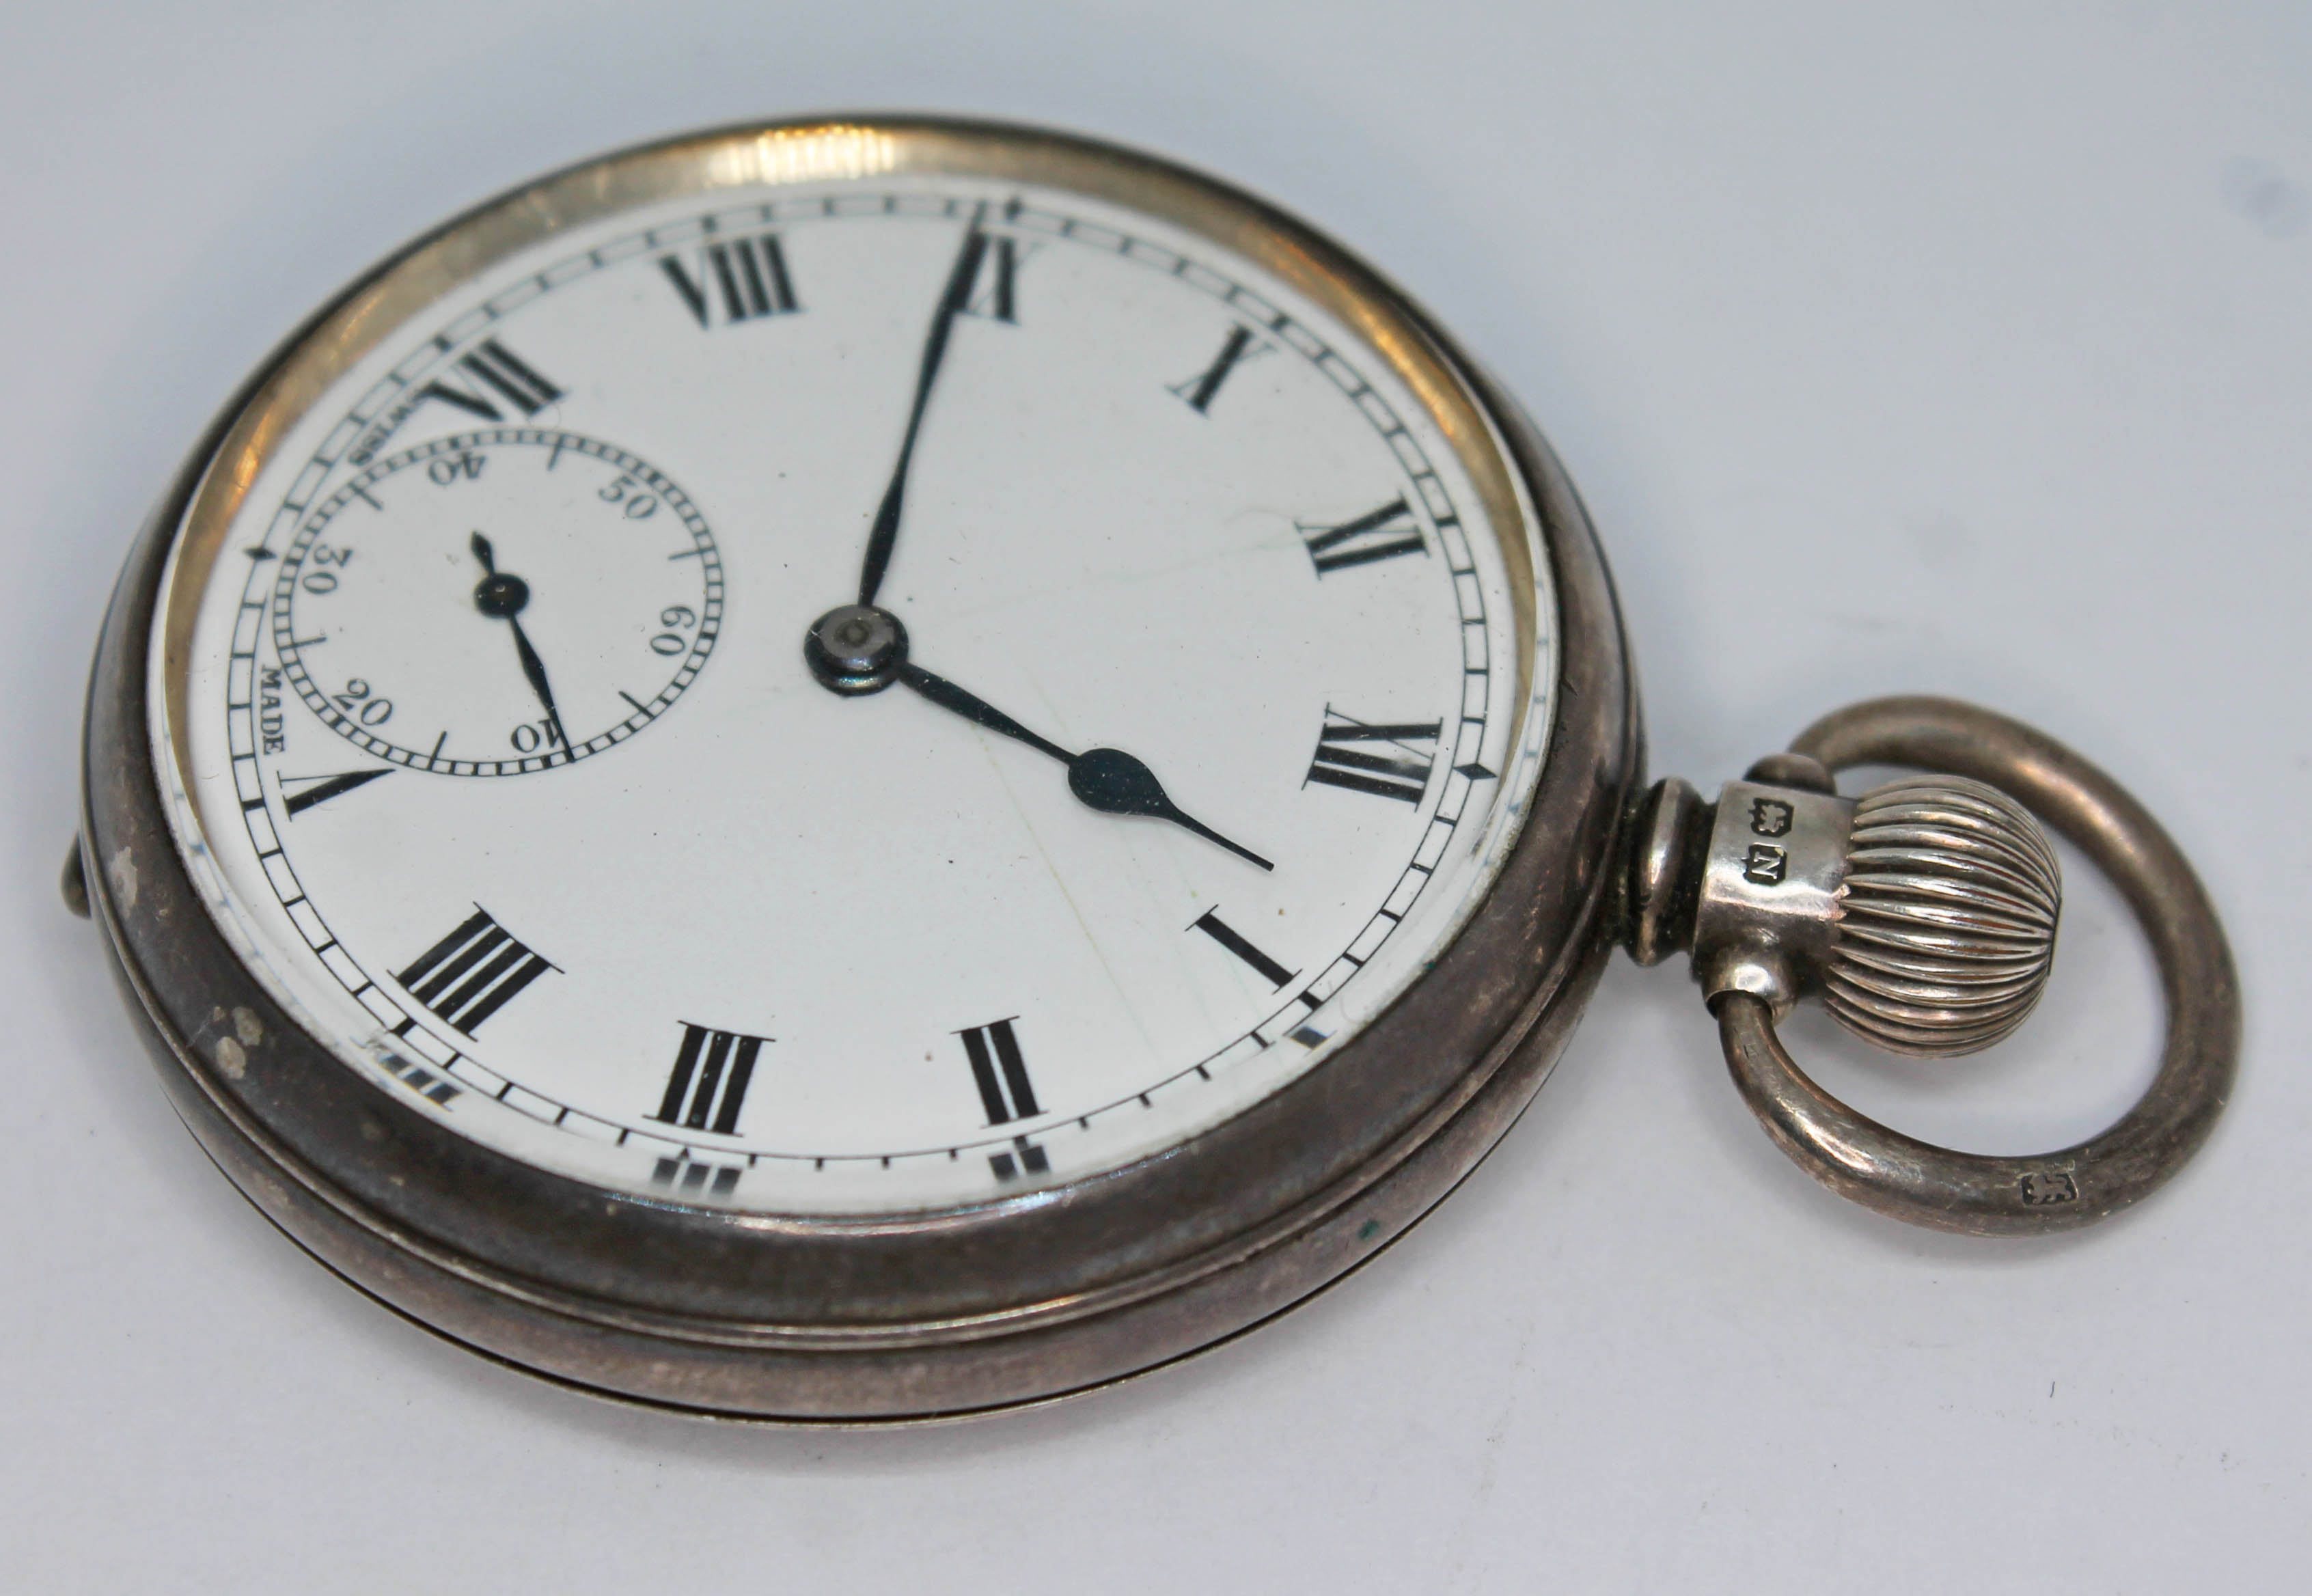 A 1930s hallmarked silver Helvetia pocket watch with white dial, Roman numerals and hands in black